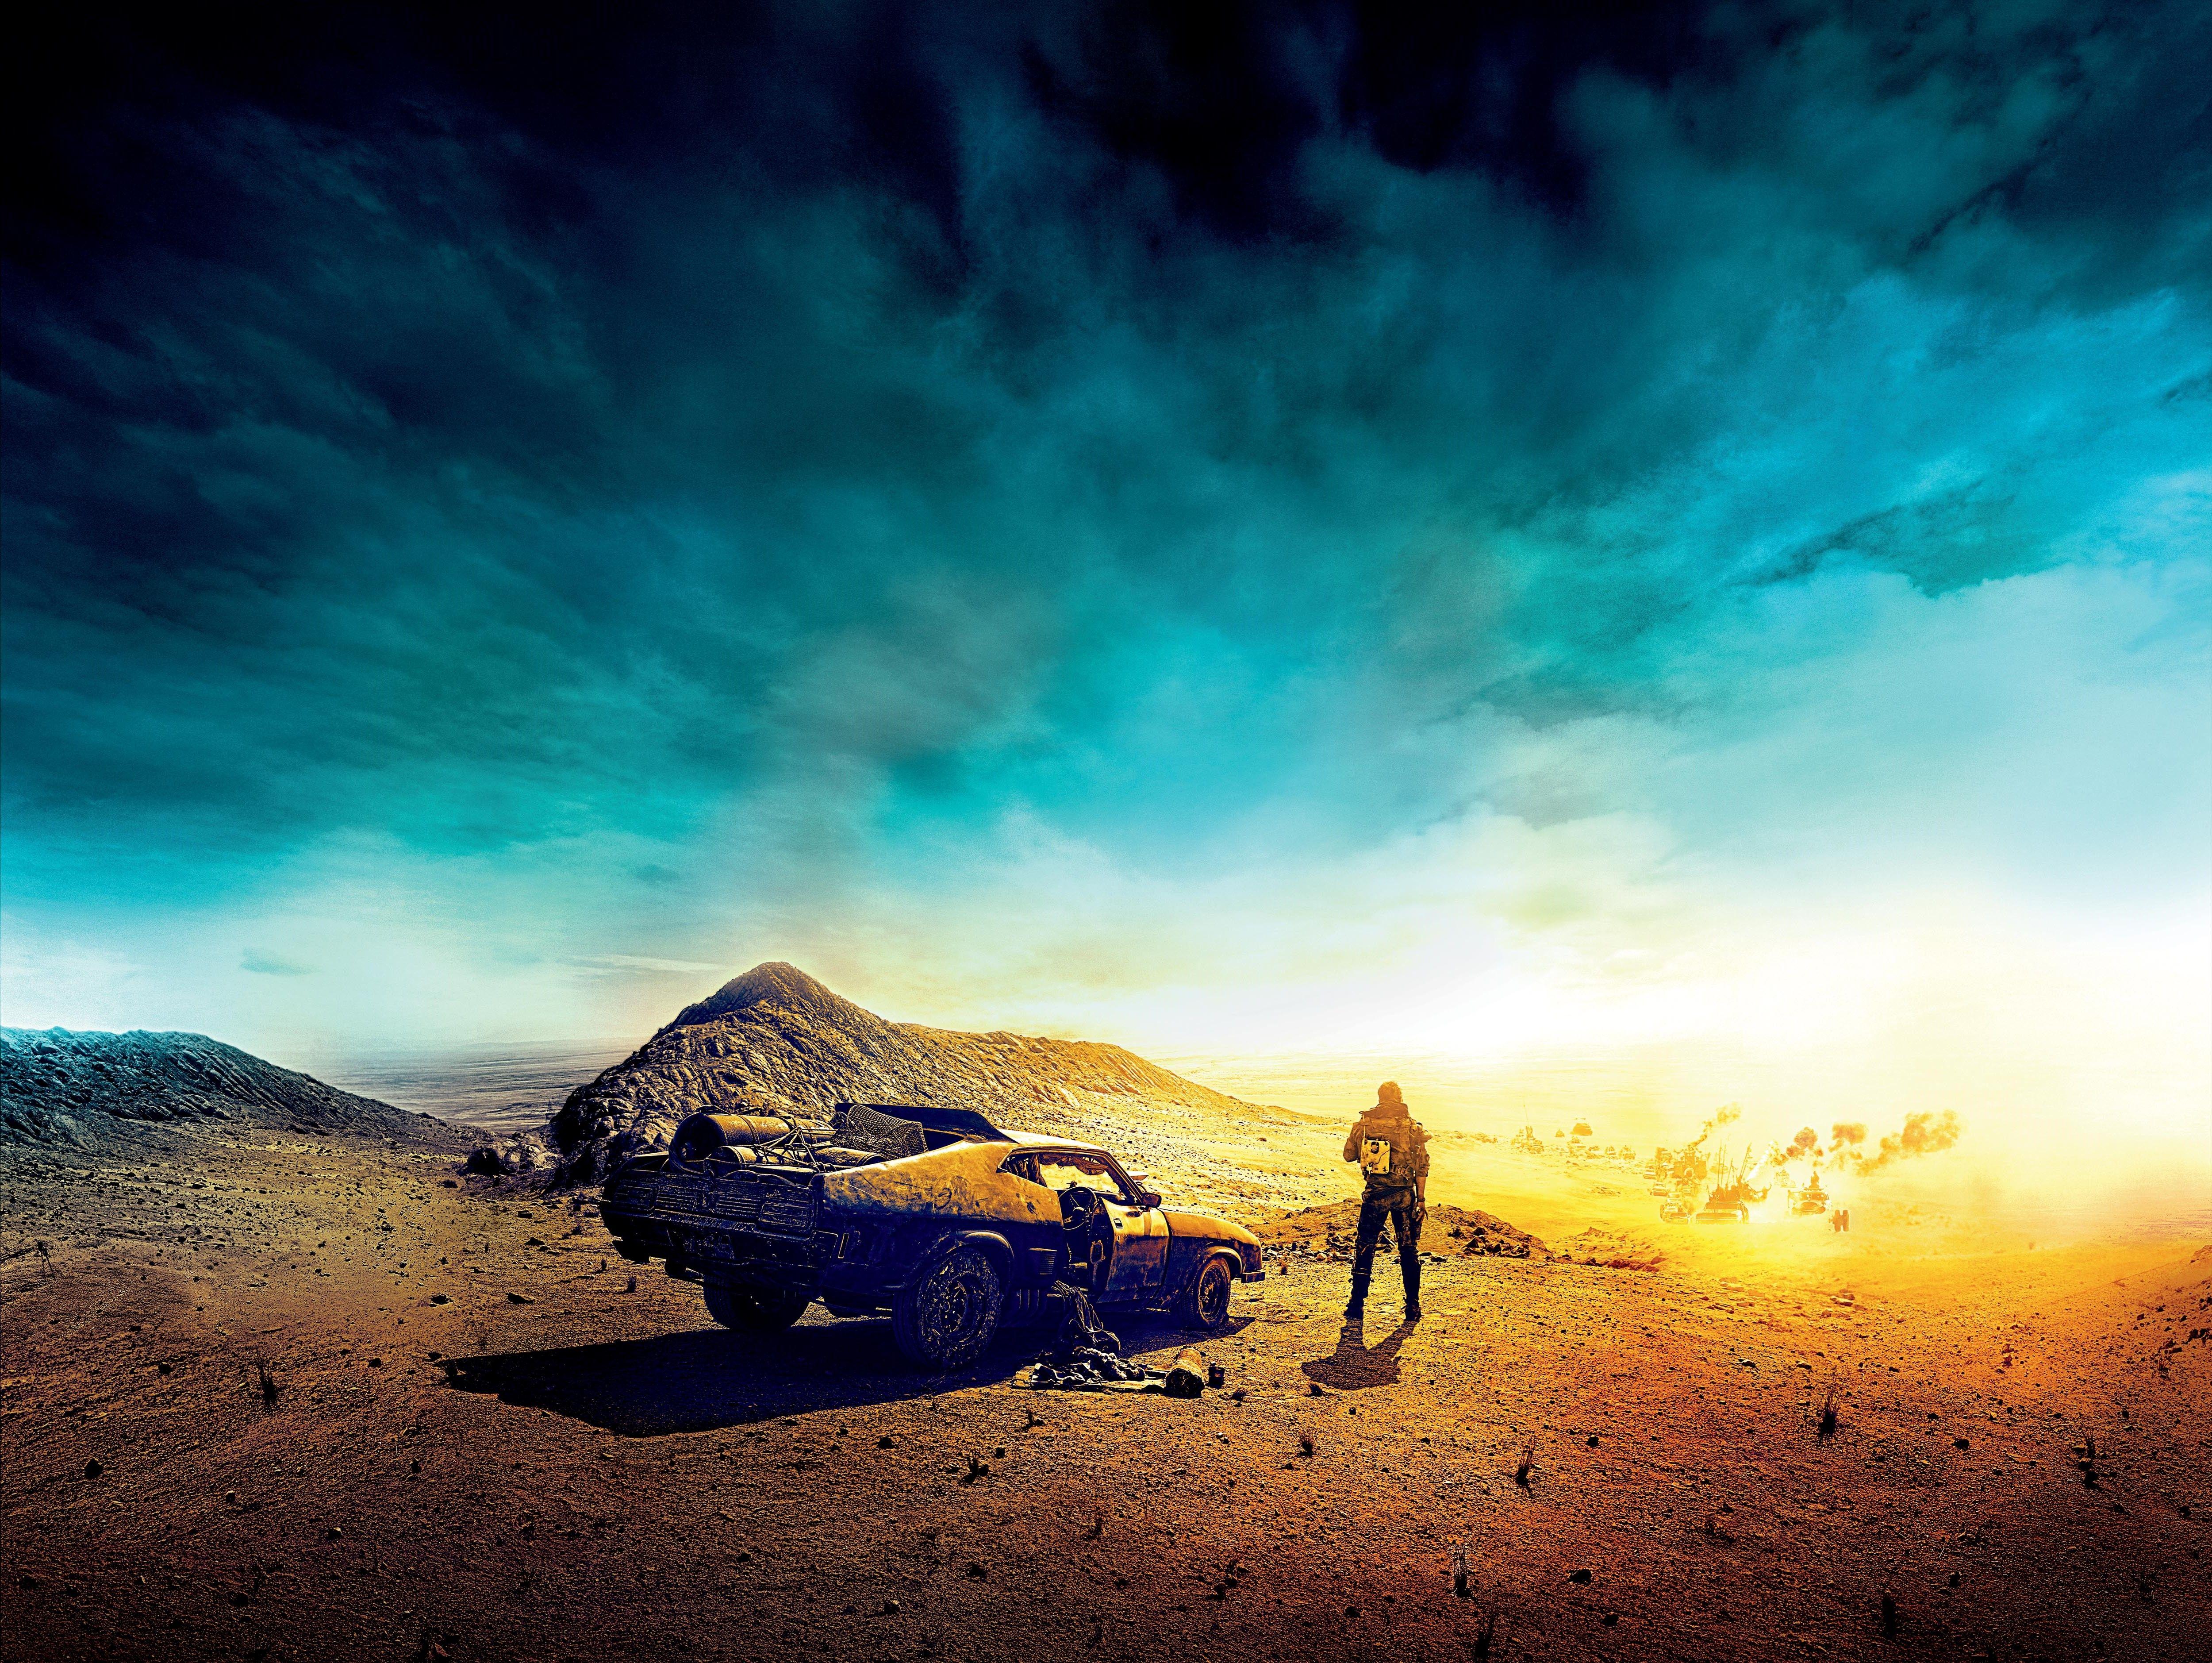  Mad  Max  4K  Wallpapers  Top Free Mad  Max  4K  Backgrounds  